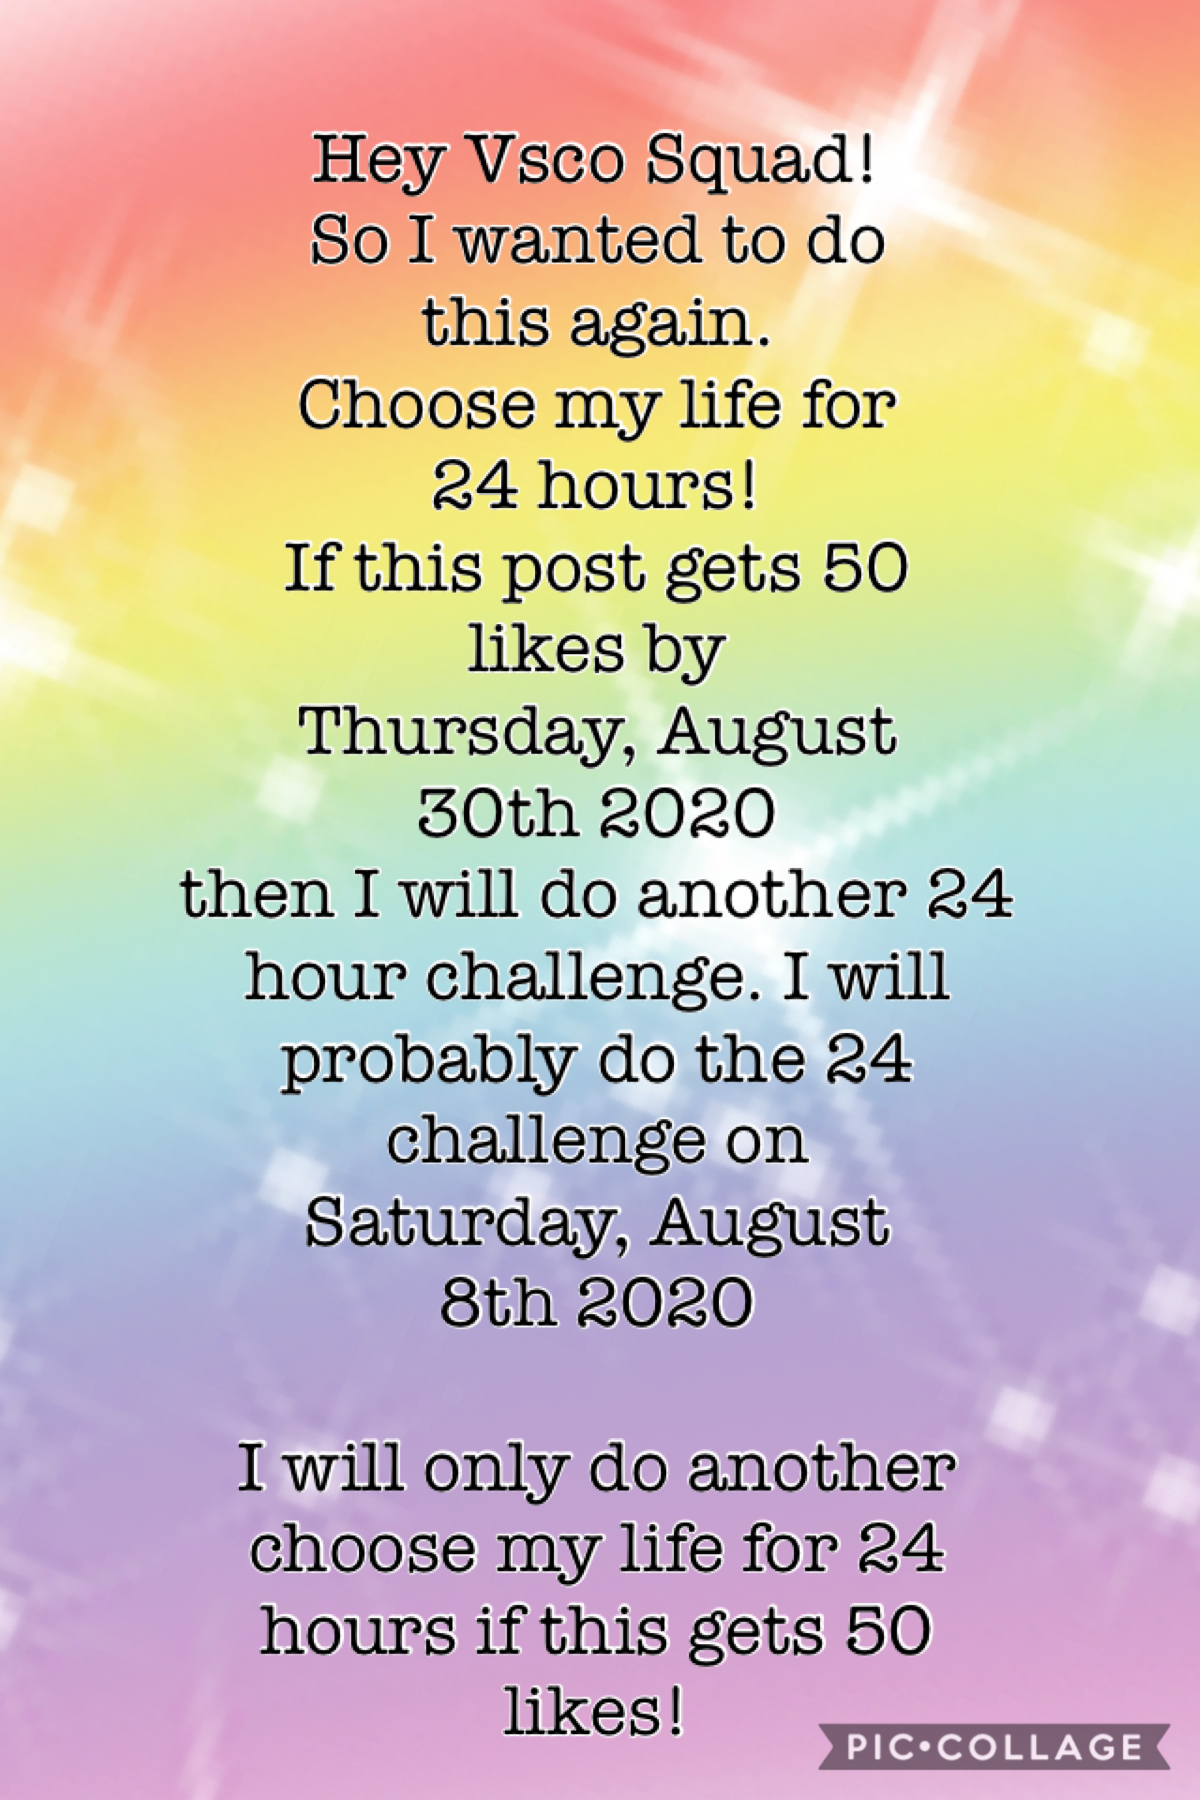 ✨Tap✨
This post:
50+ likes - choose my life for 24 hours
49- likes - no choose my life for 24 hours 
Please like!!!